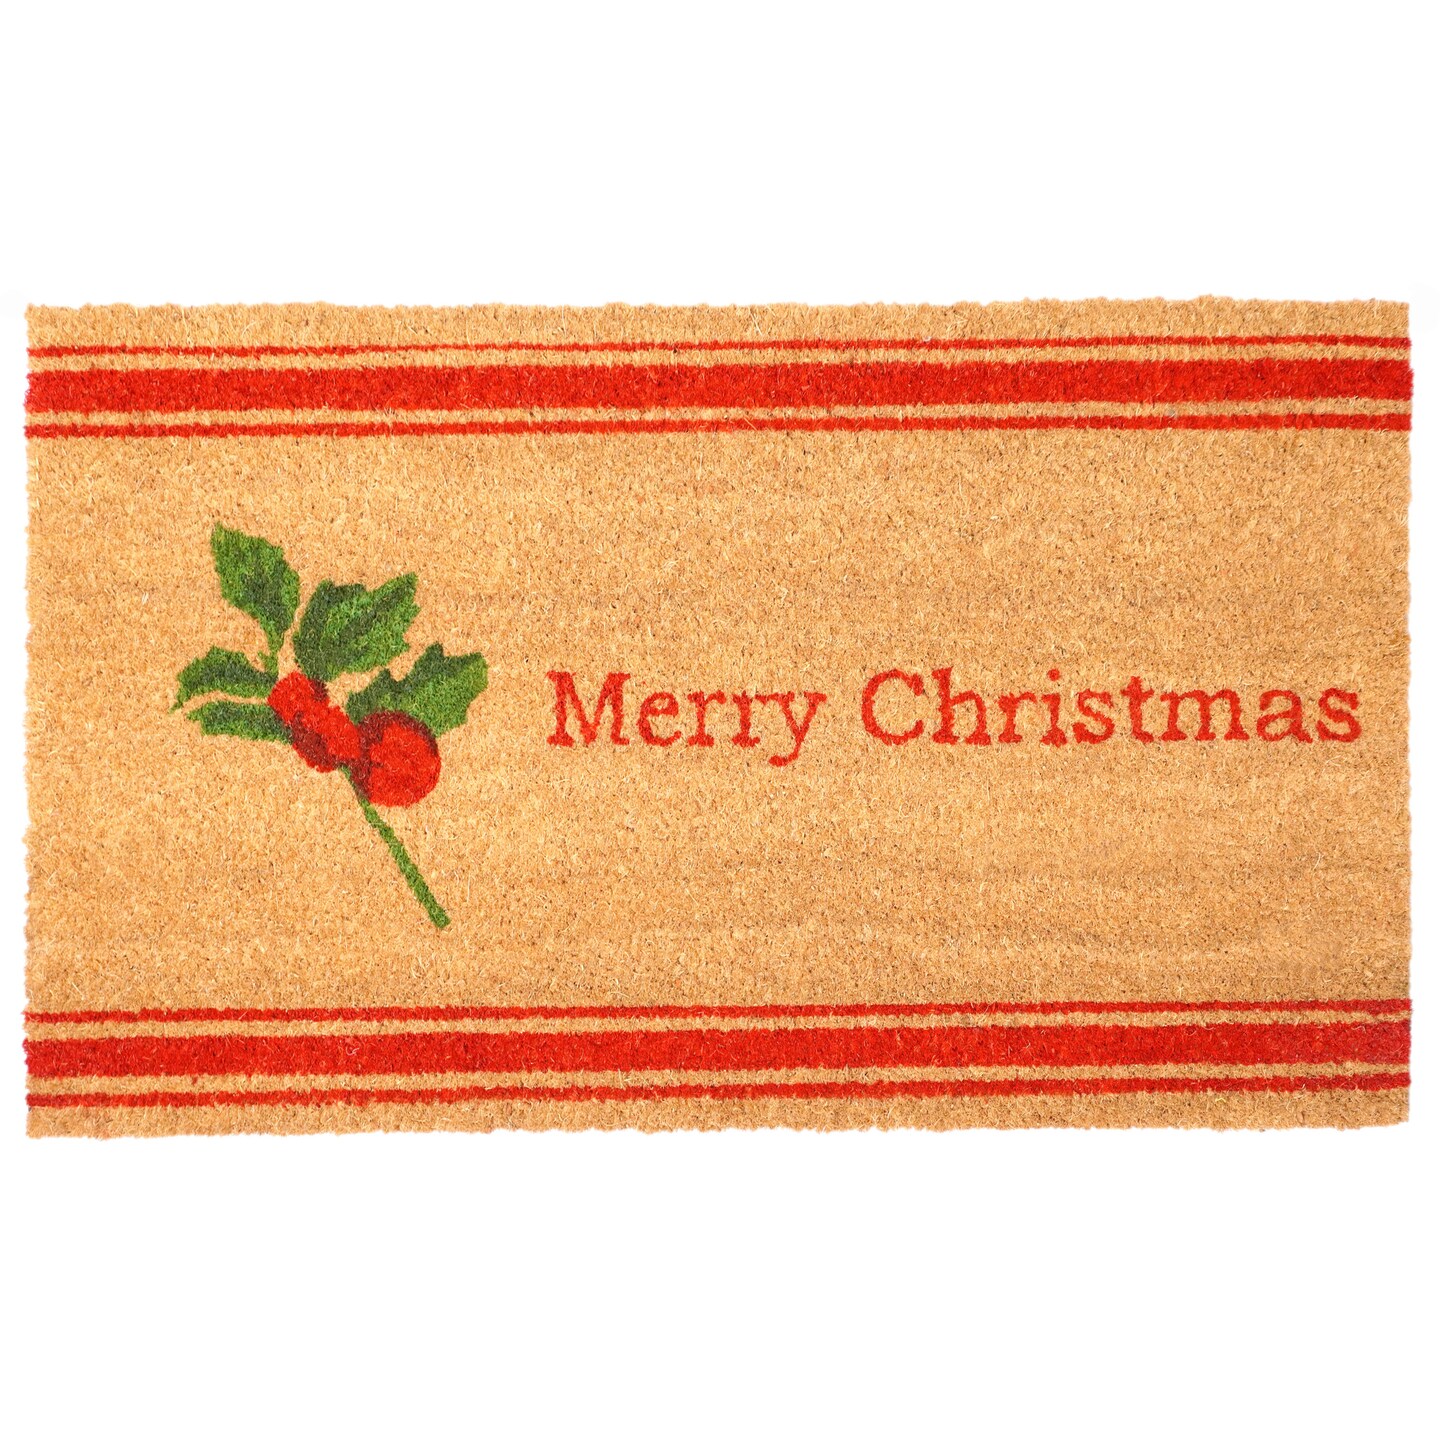 Merry Christmas Holly Berry Doormat